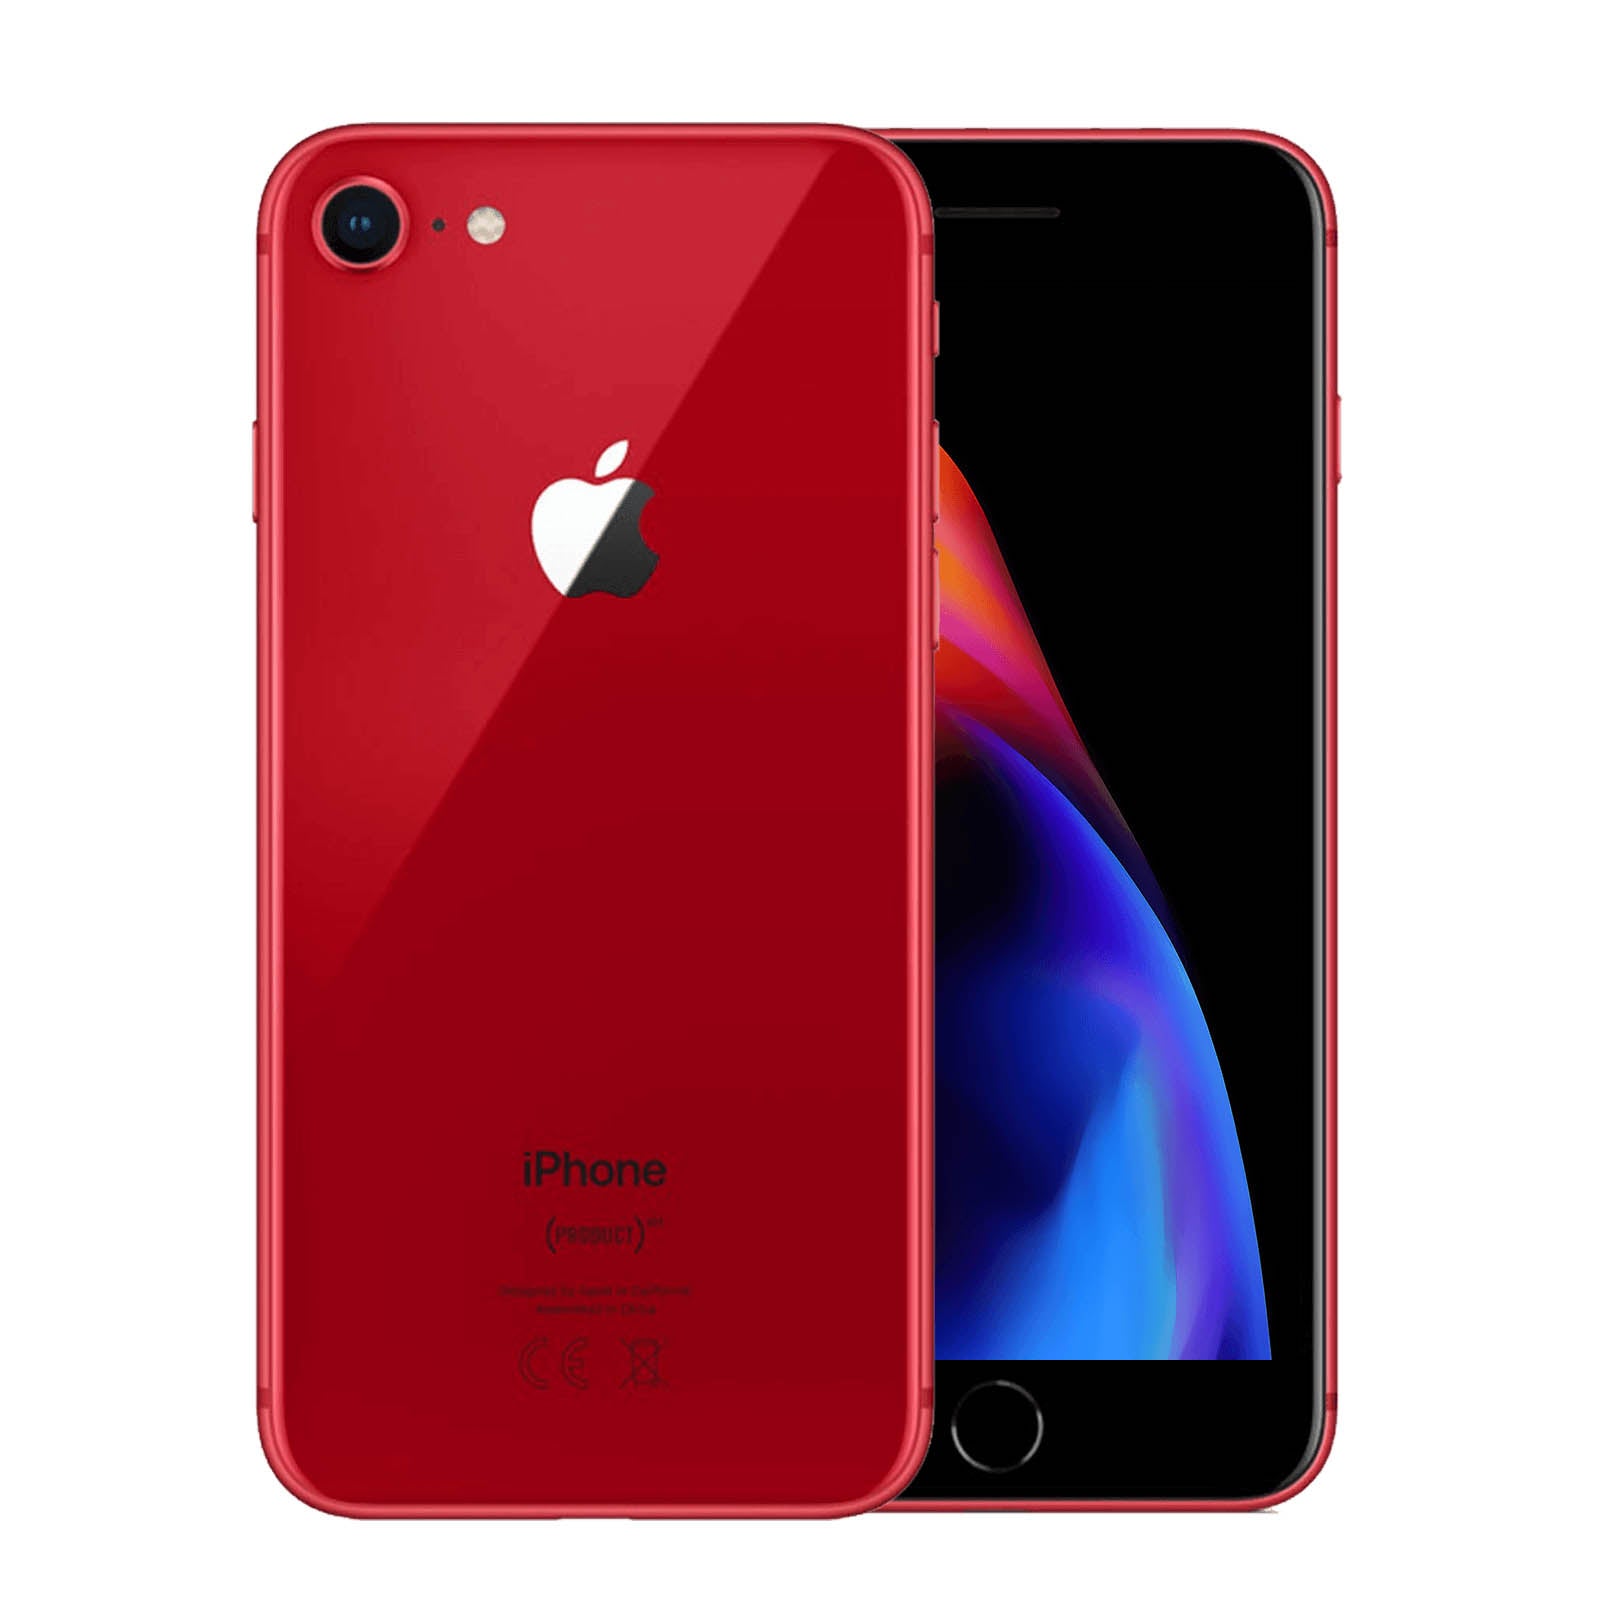 Apple iPhone 8 64GB Product Red Impecable - Desbloqueado